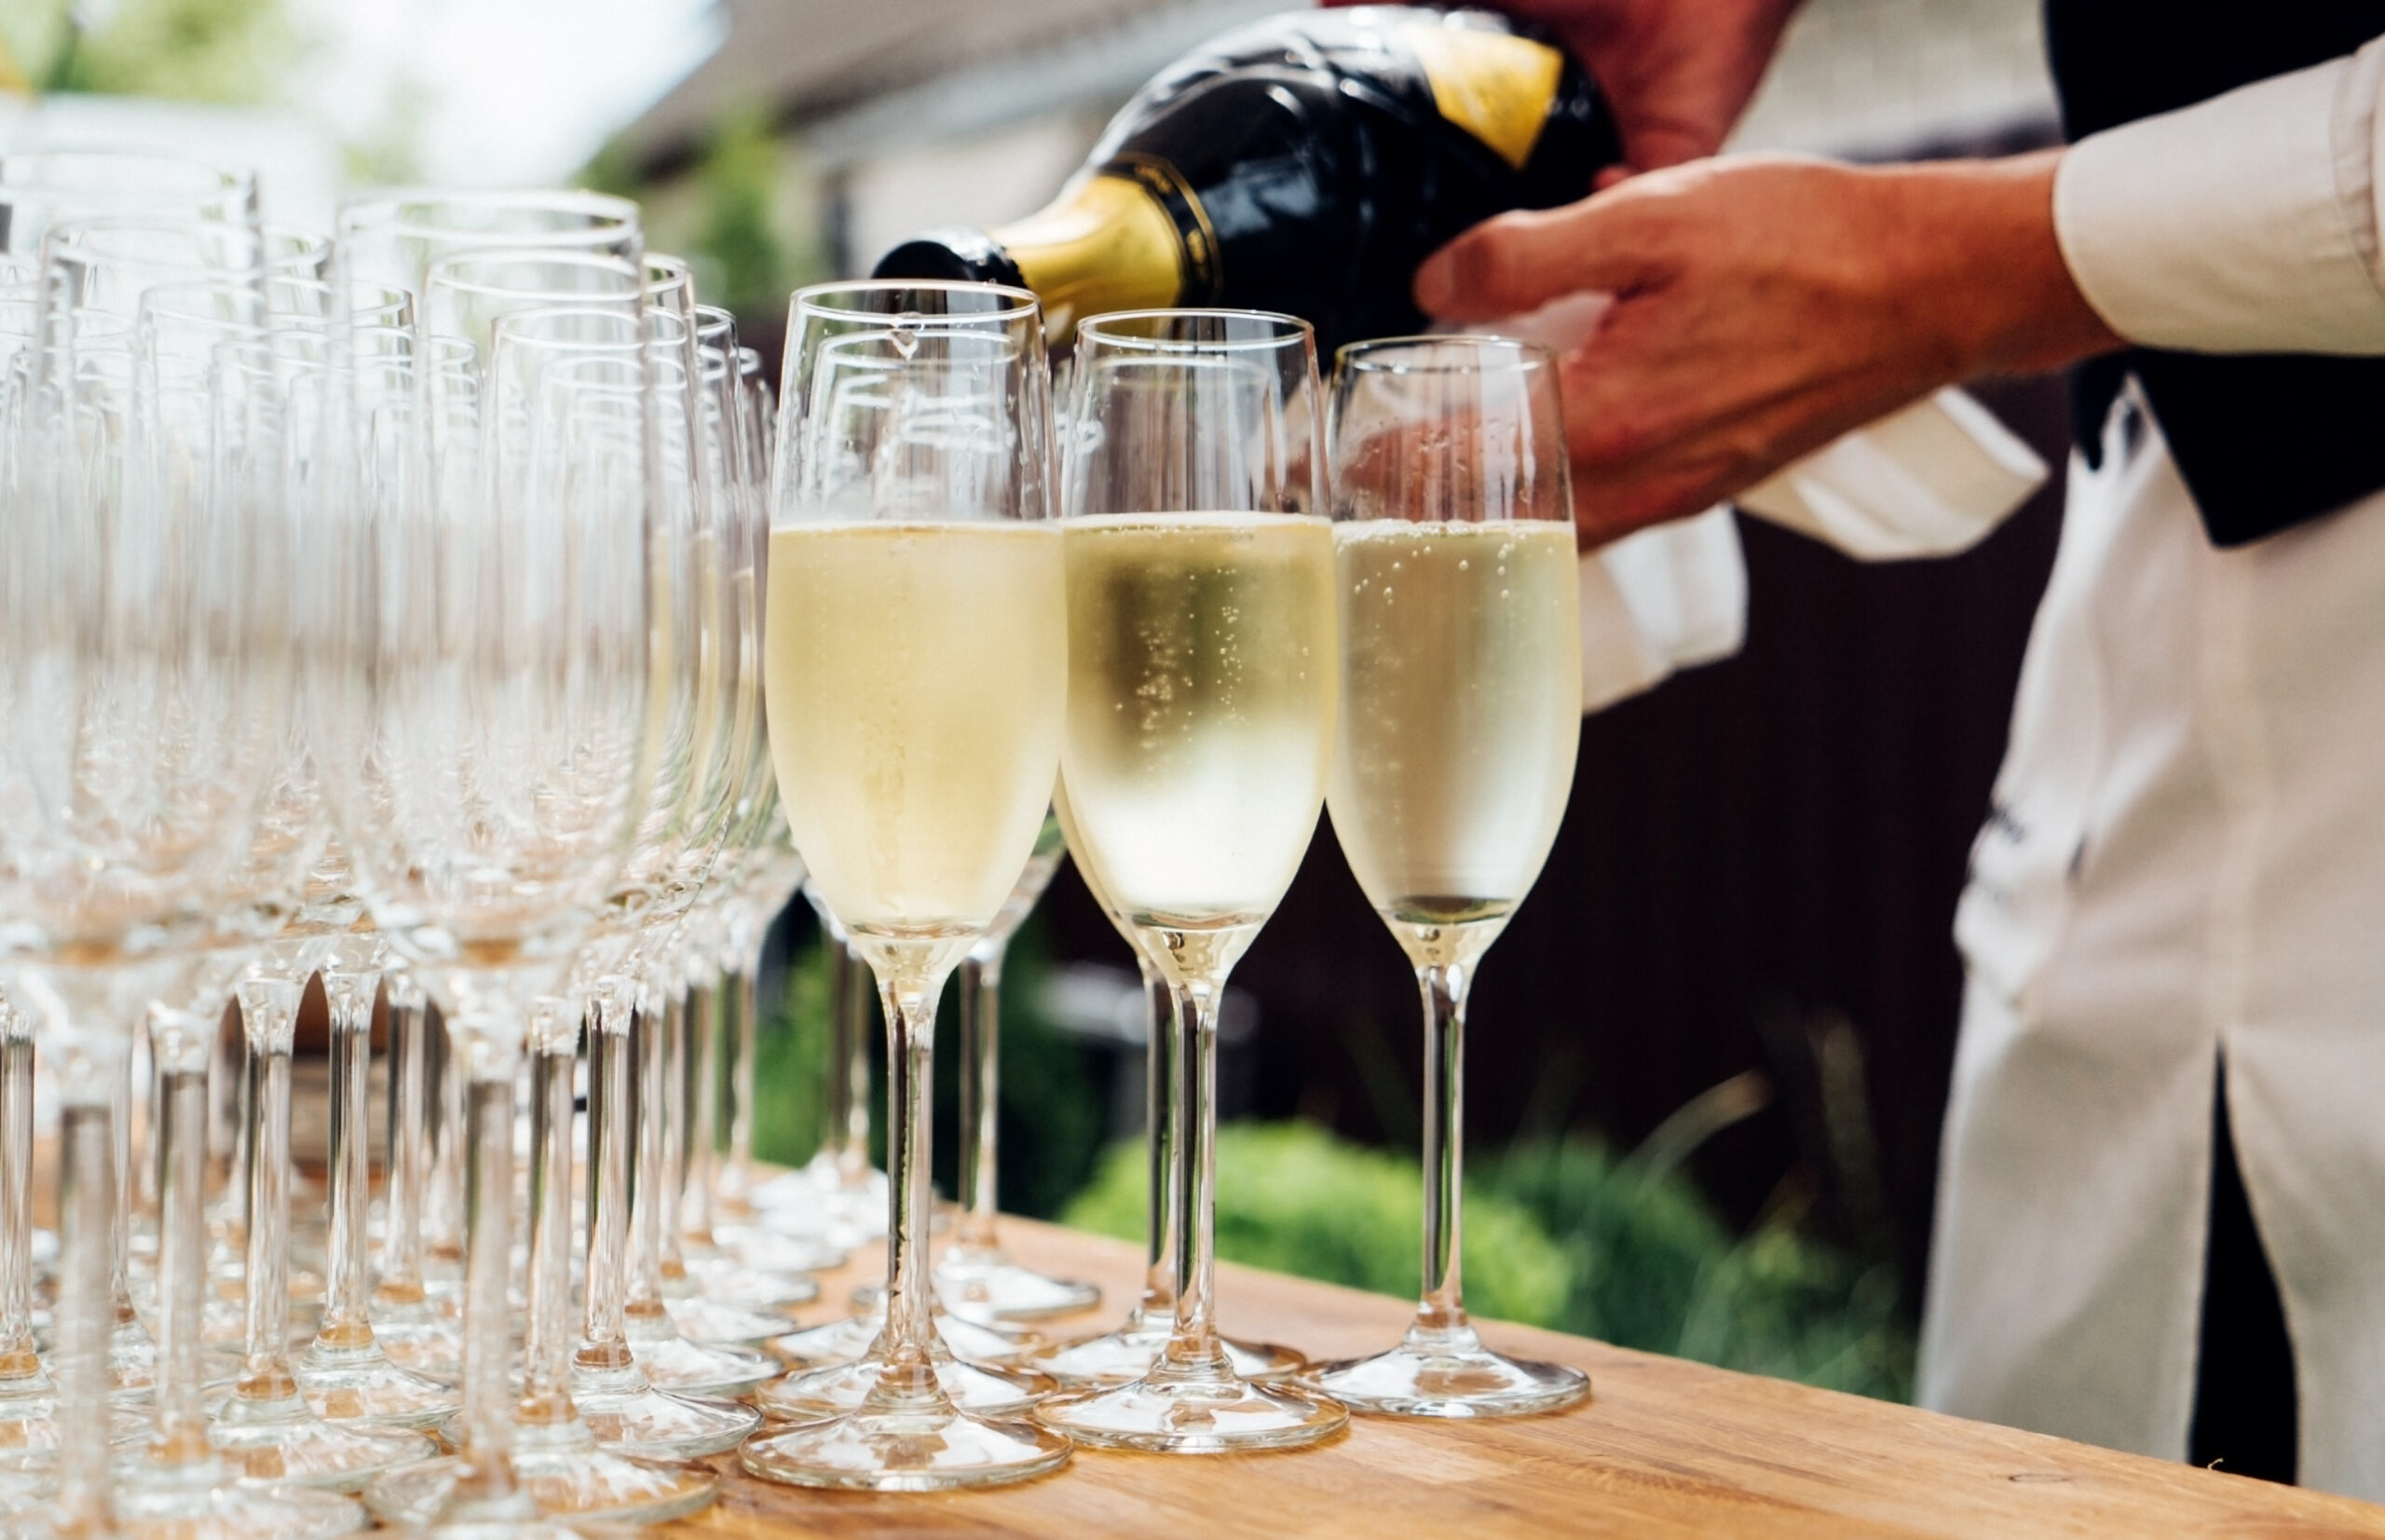 Fine wines and champagne are available at your private event in Manassas, Virginia